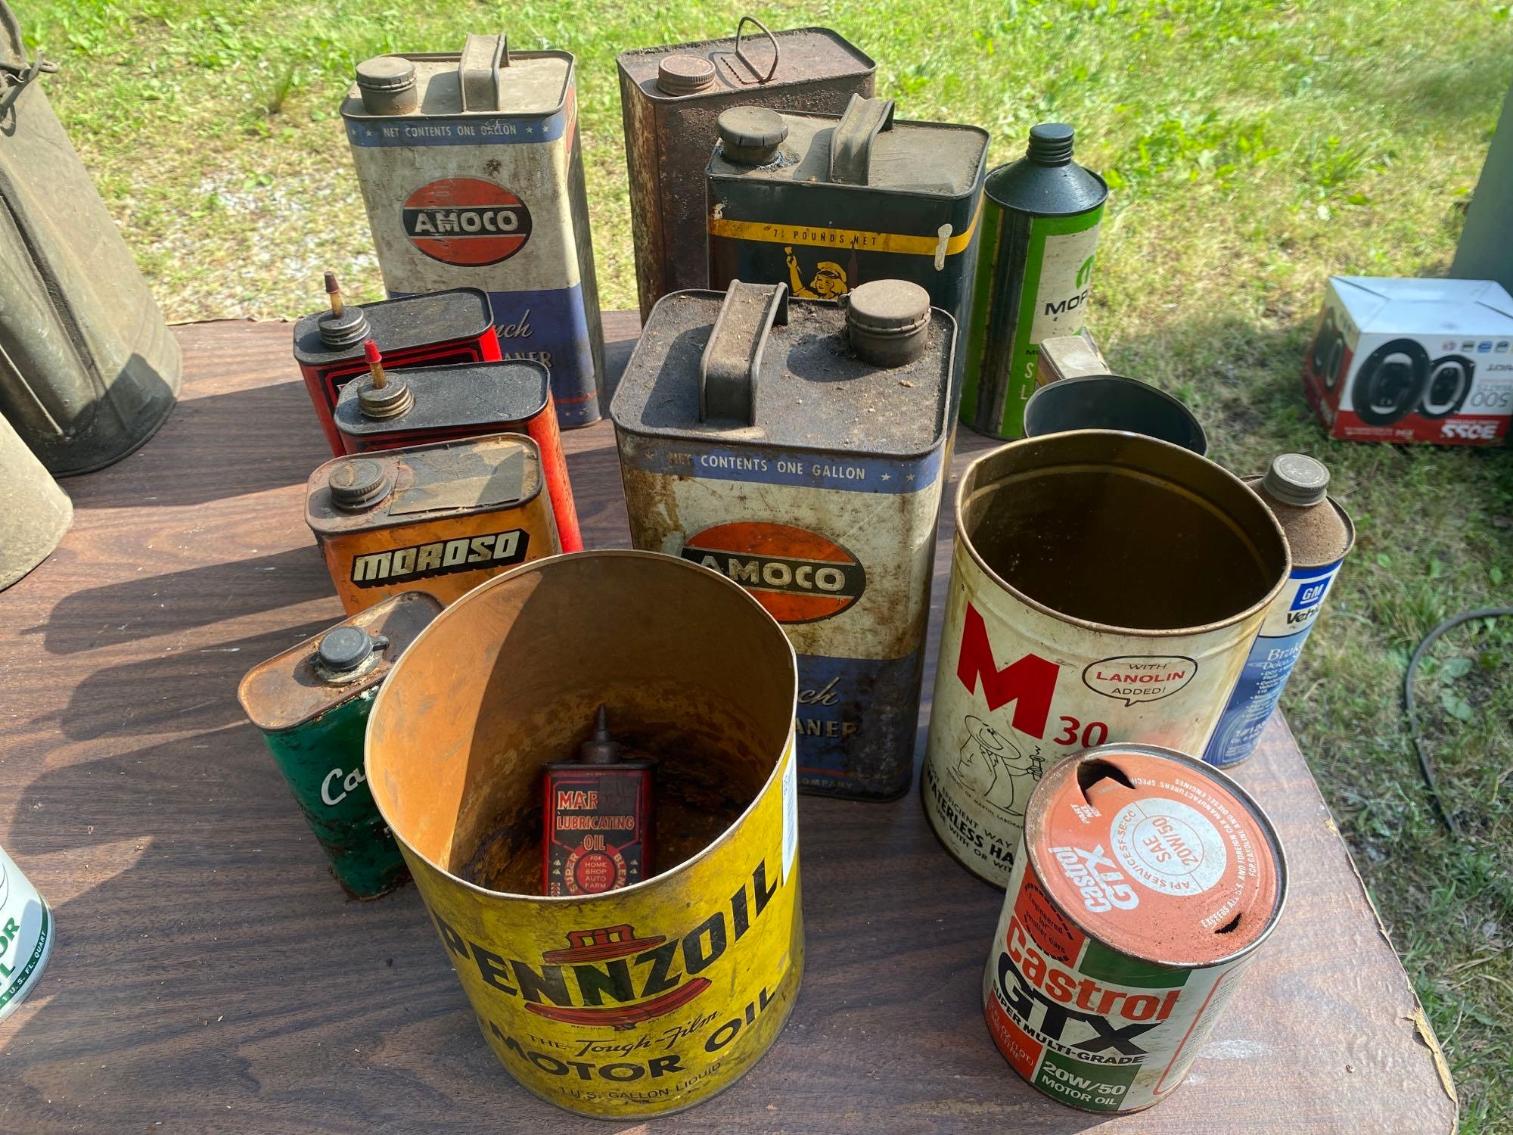 Image for Group of Misc. Oil/French Dry Cleaner/Amoco Oil Cans, Pennzoil Oil Can & Other Misc. Items 